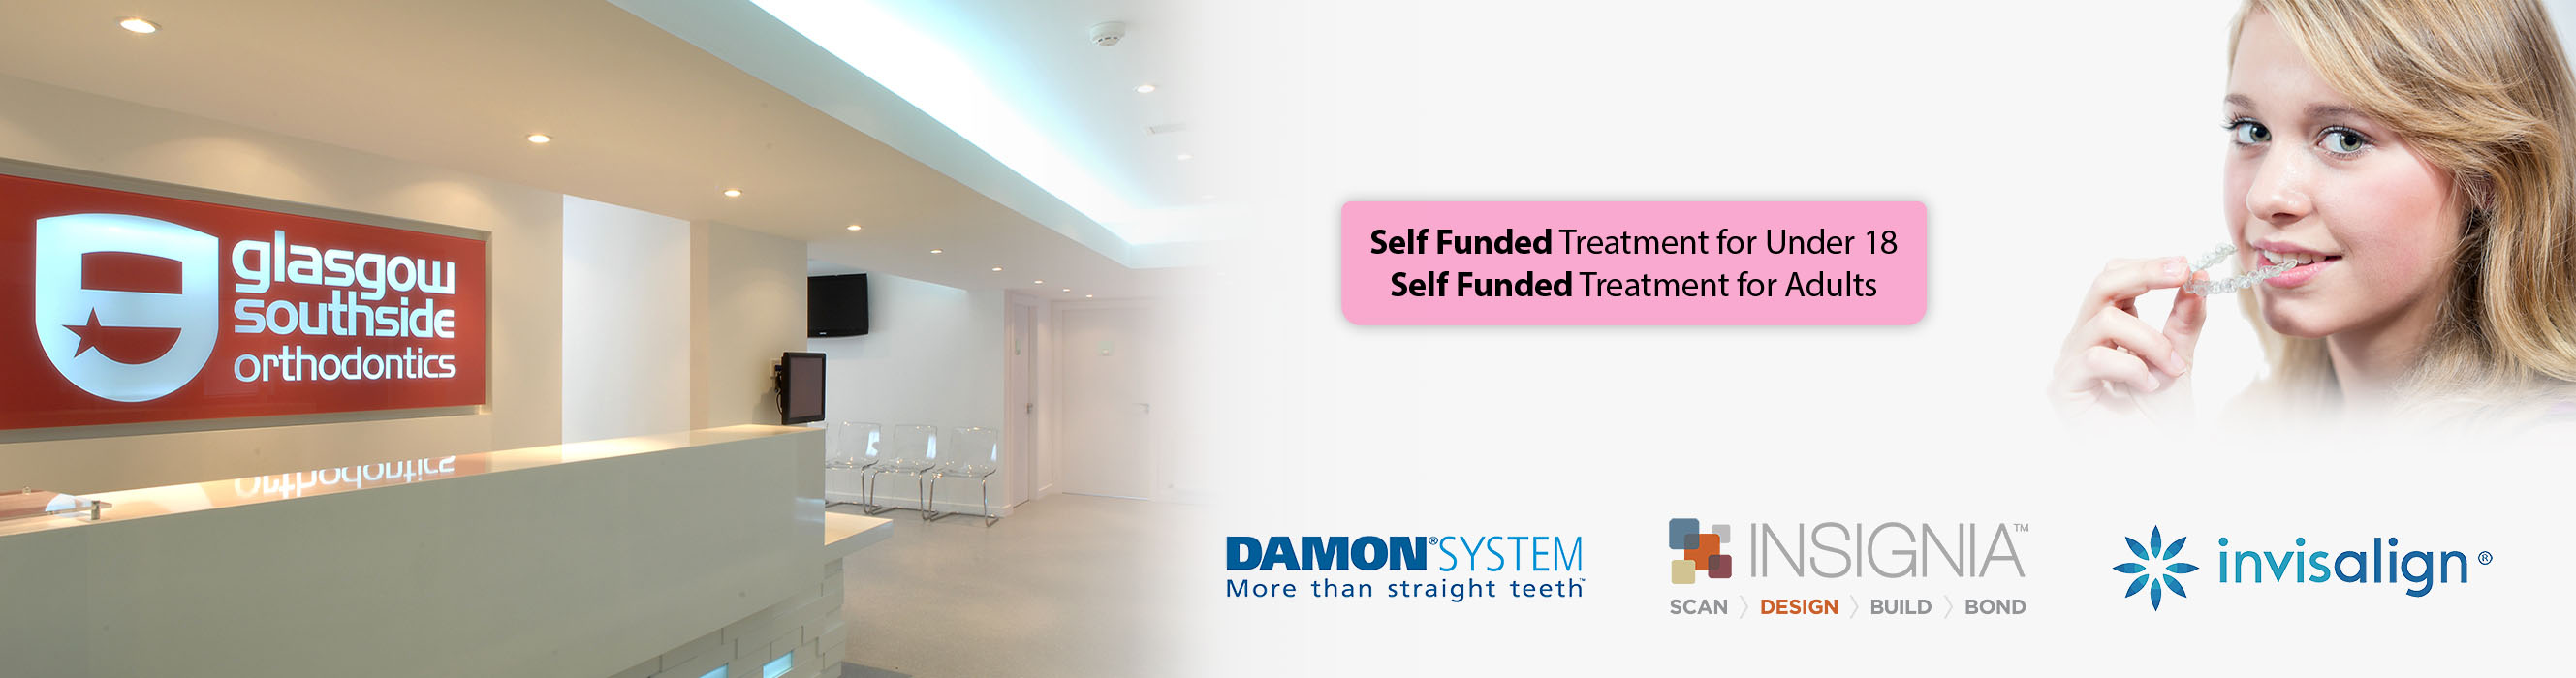 Self Funded Treatment